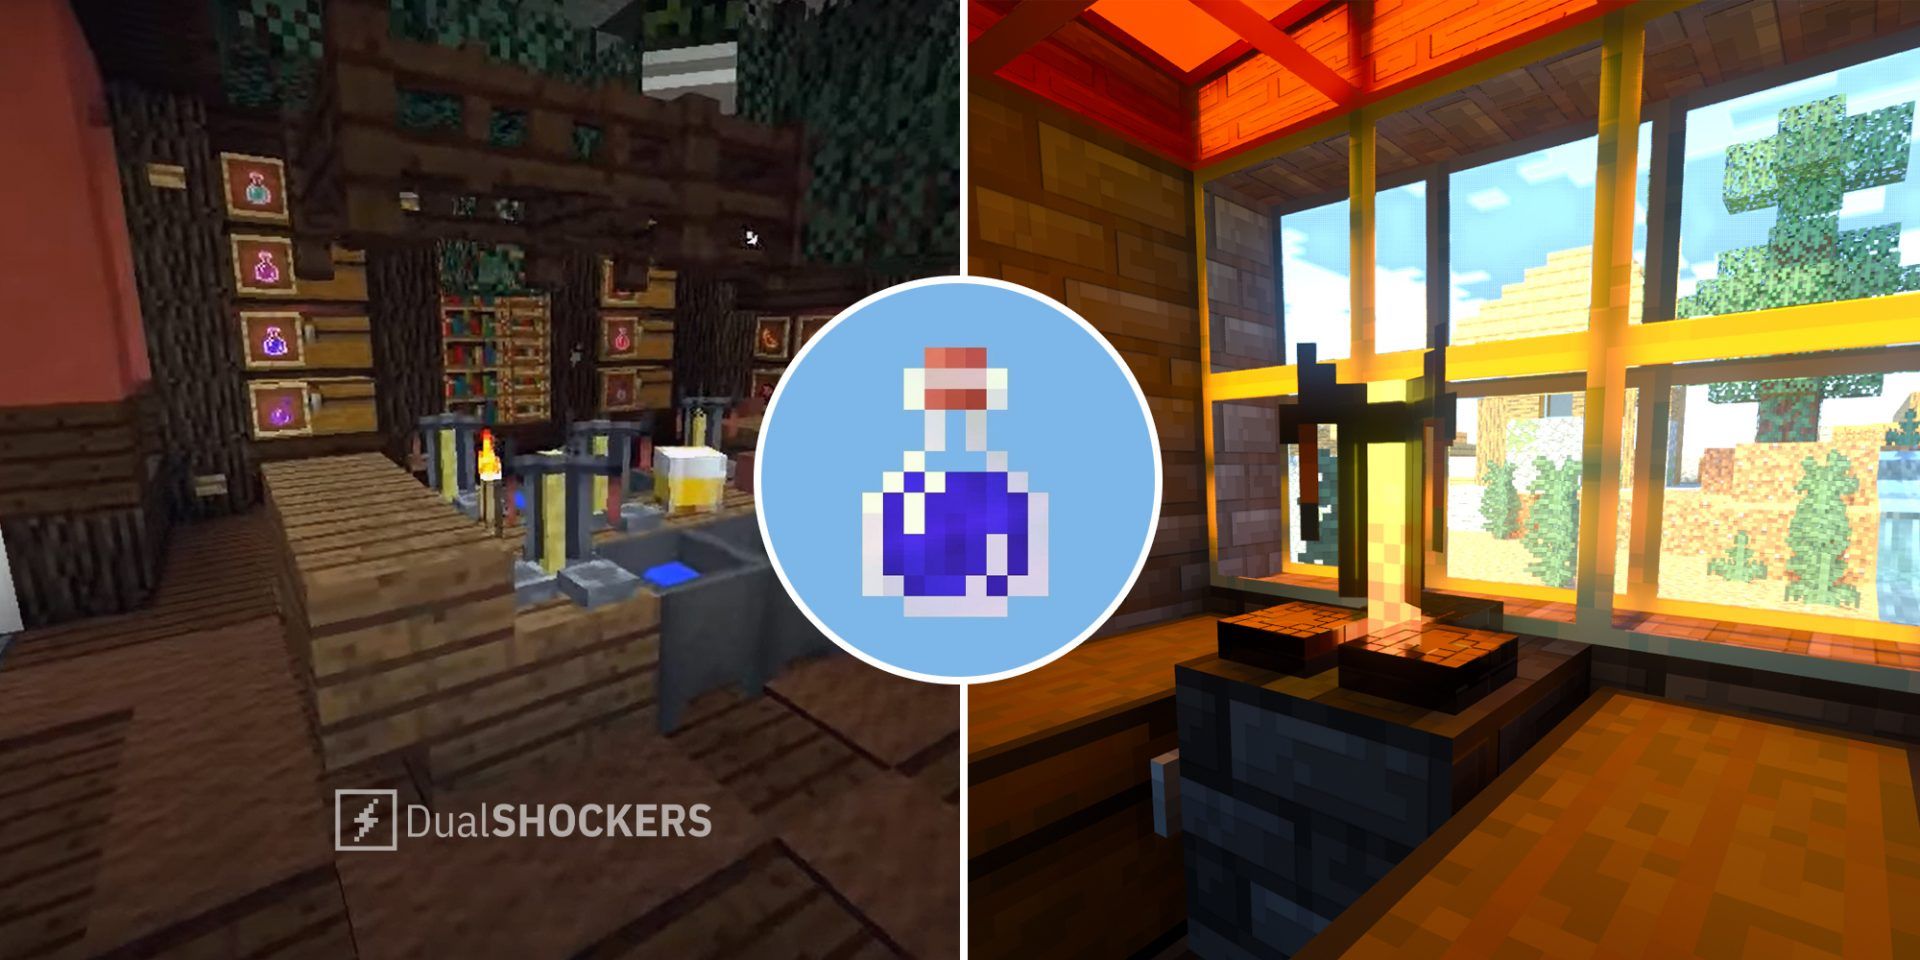 Minecraft brewing room on left, Potion of Weakness in middle, brewing station on right